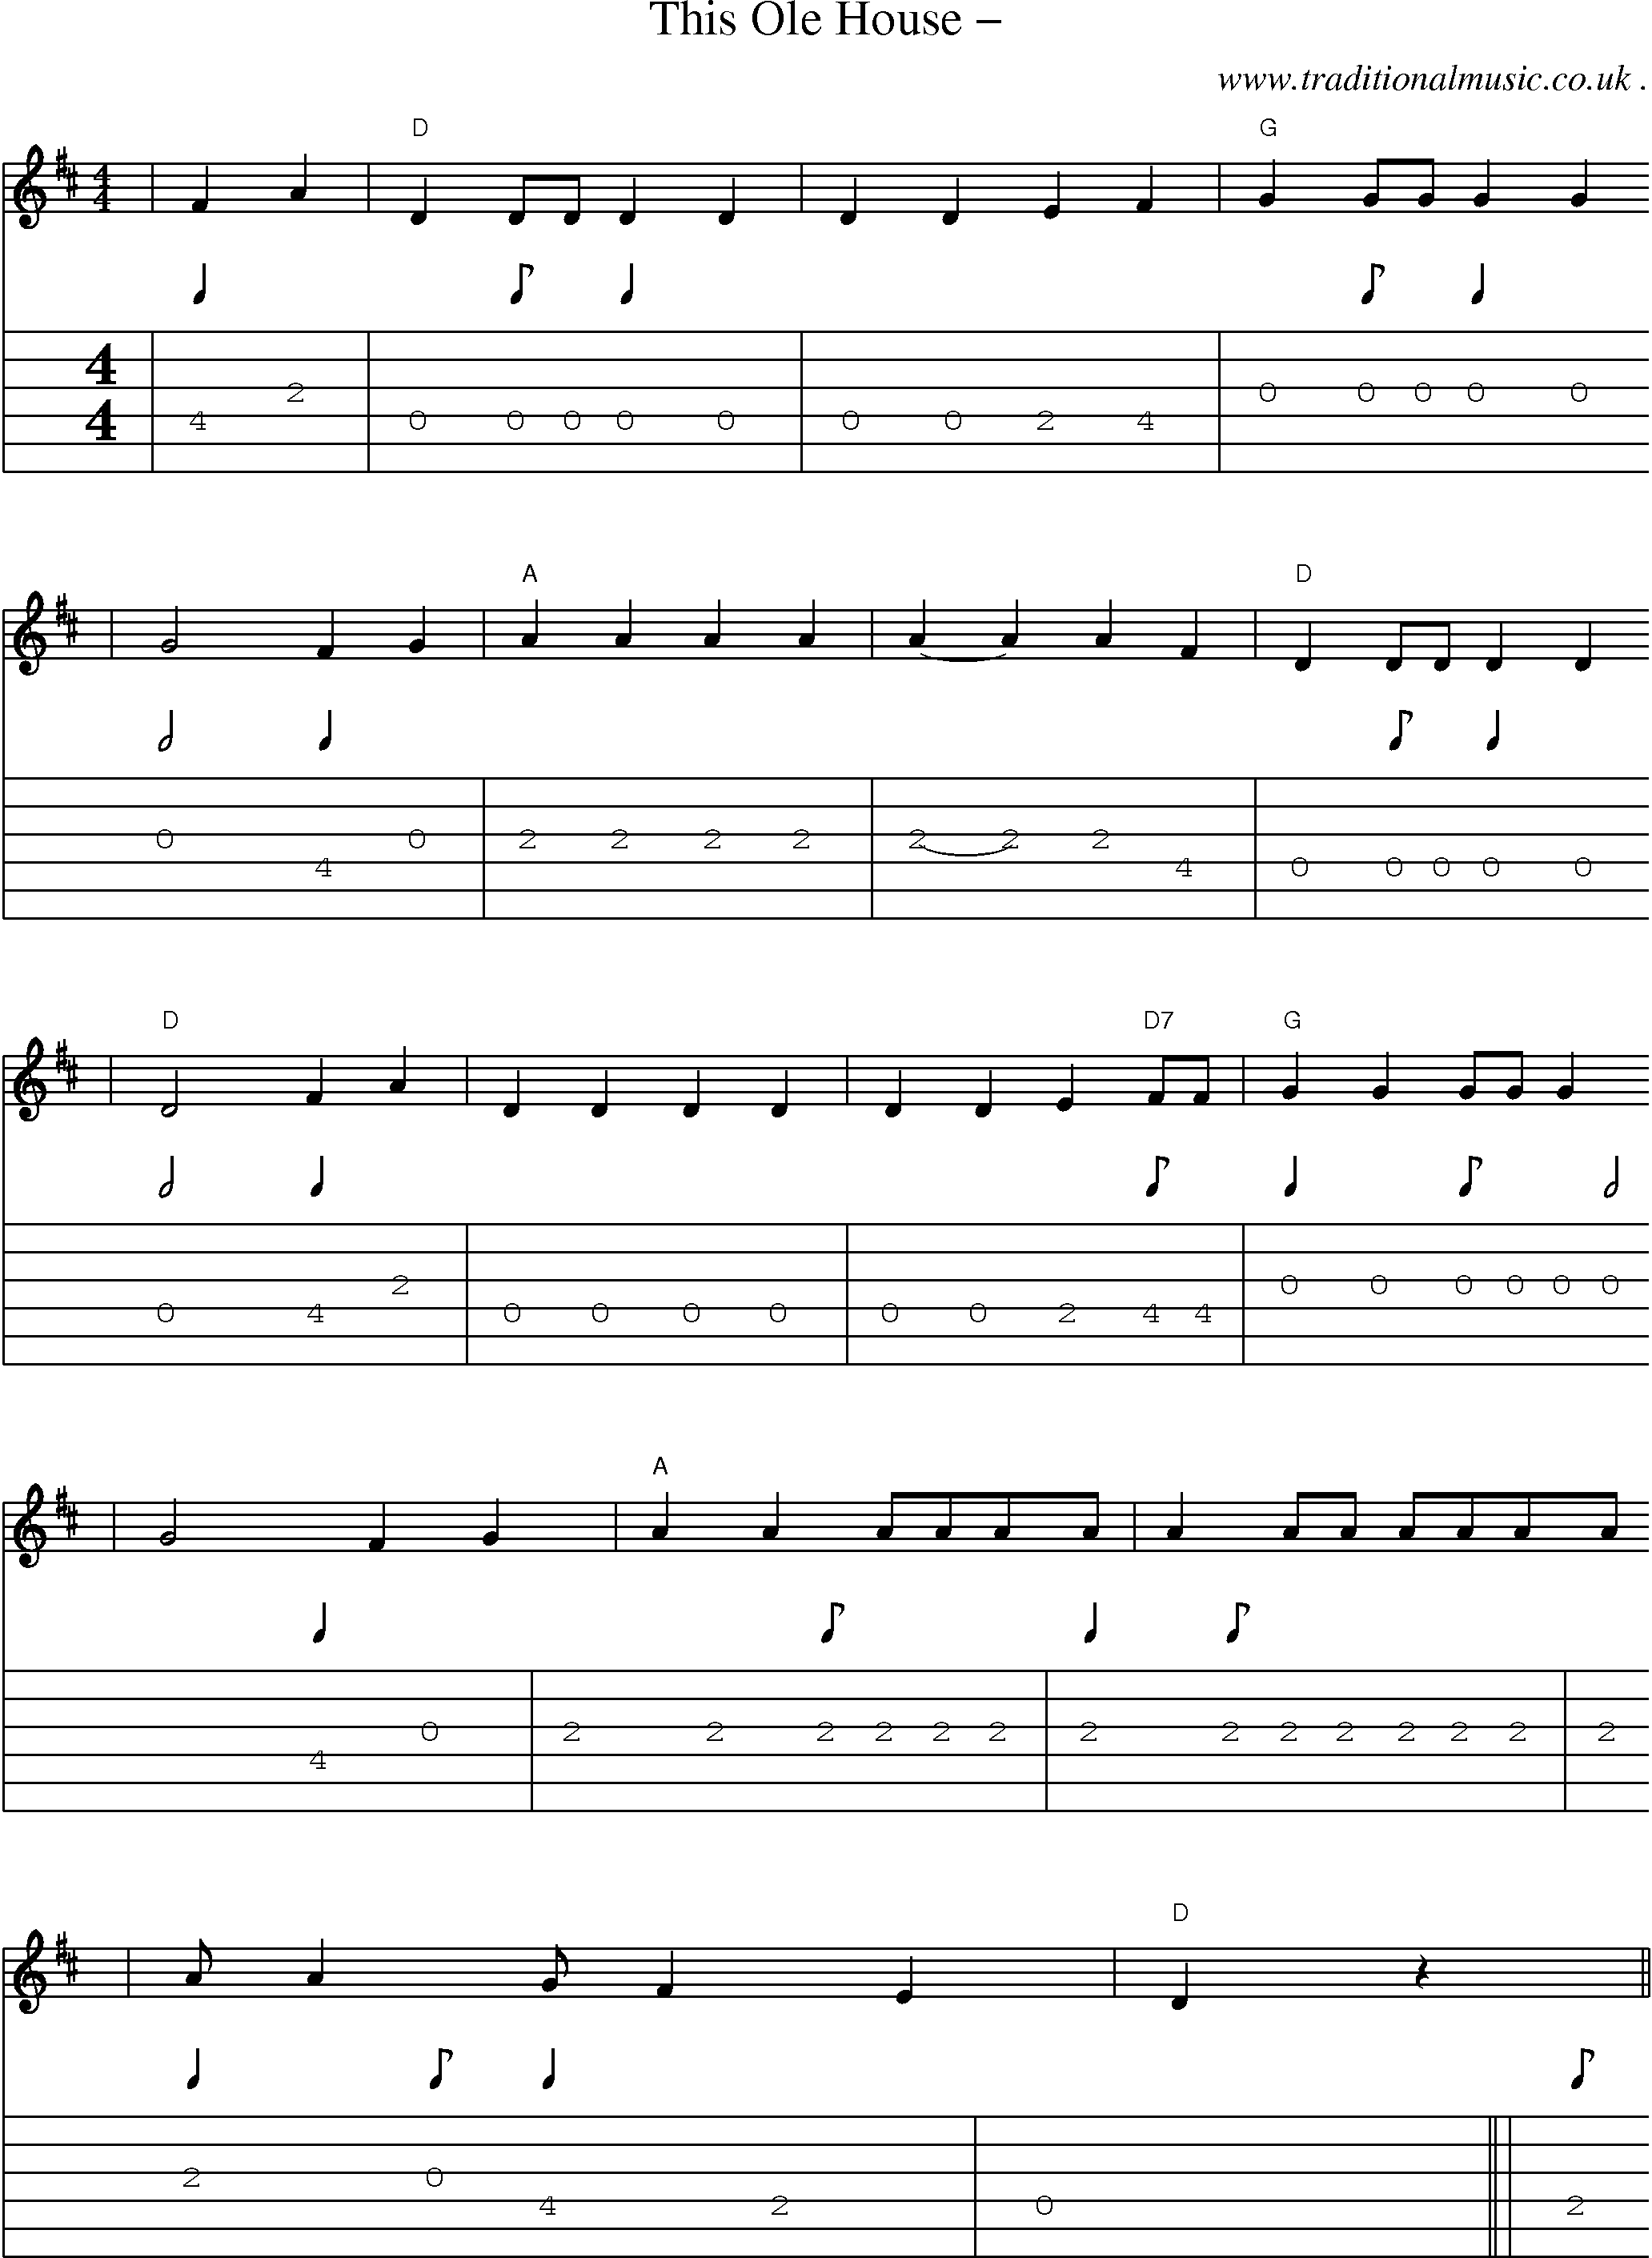 Music Score and Guitar Tabs for This Ole House